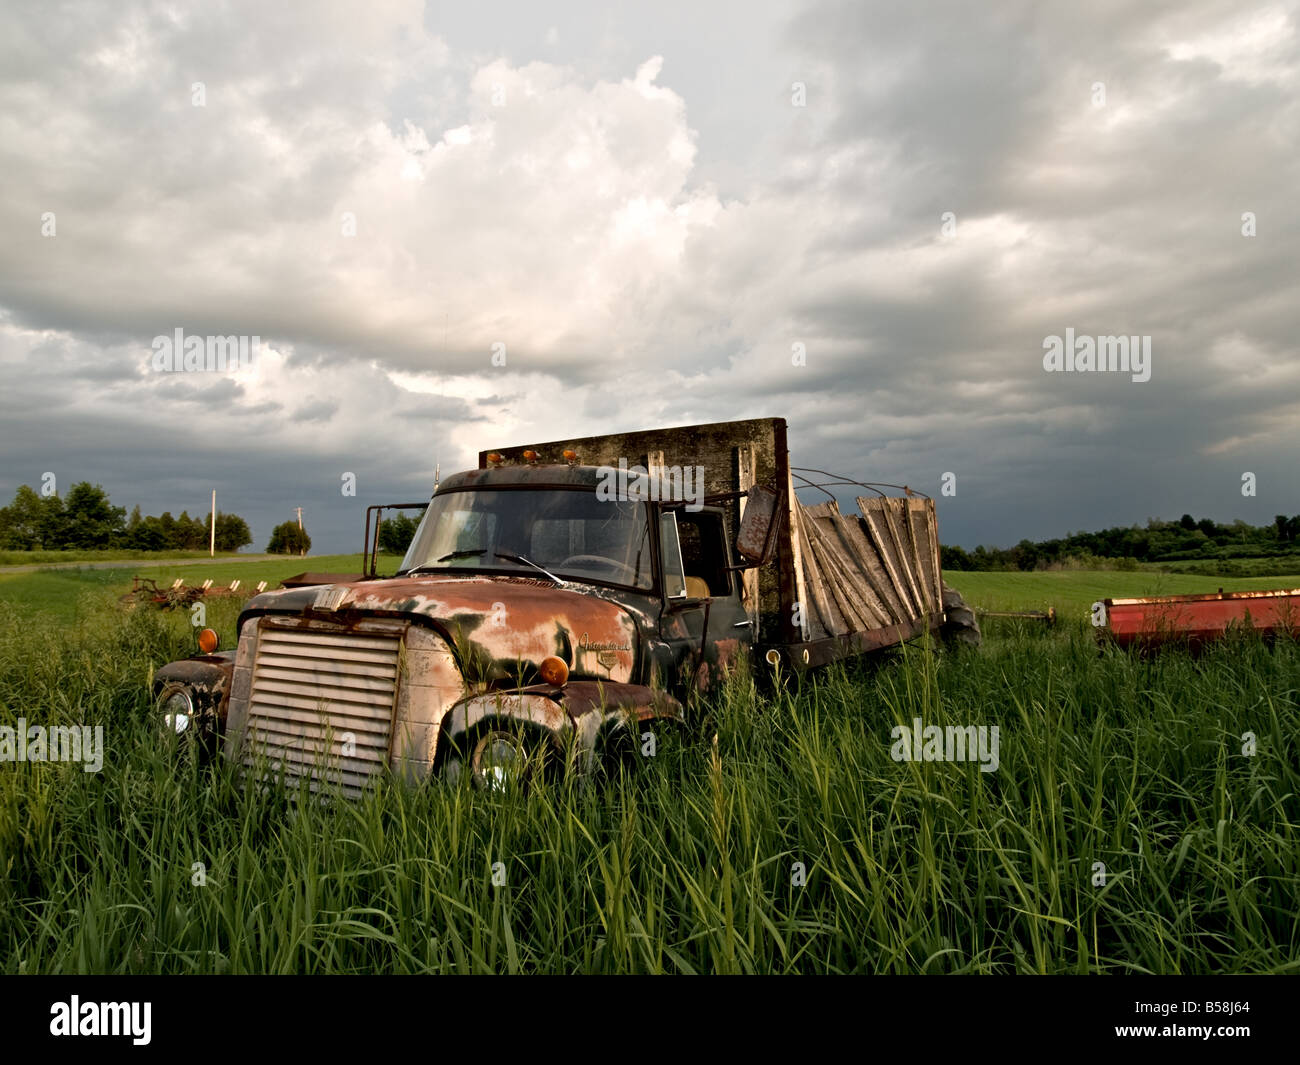 Antique International Harvester Truck in a field of tall grass Stock Photo